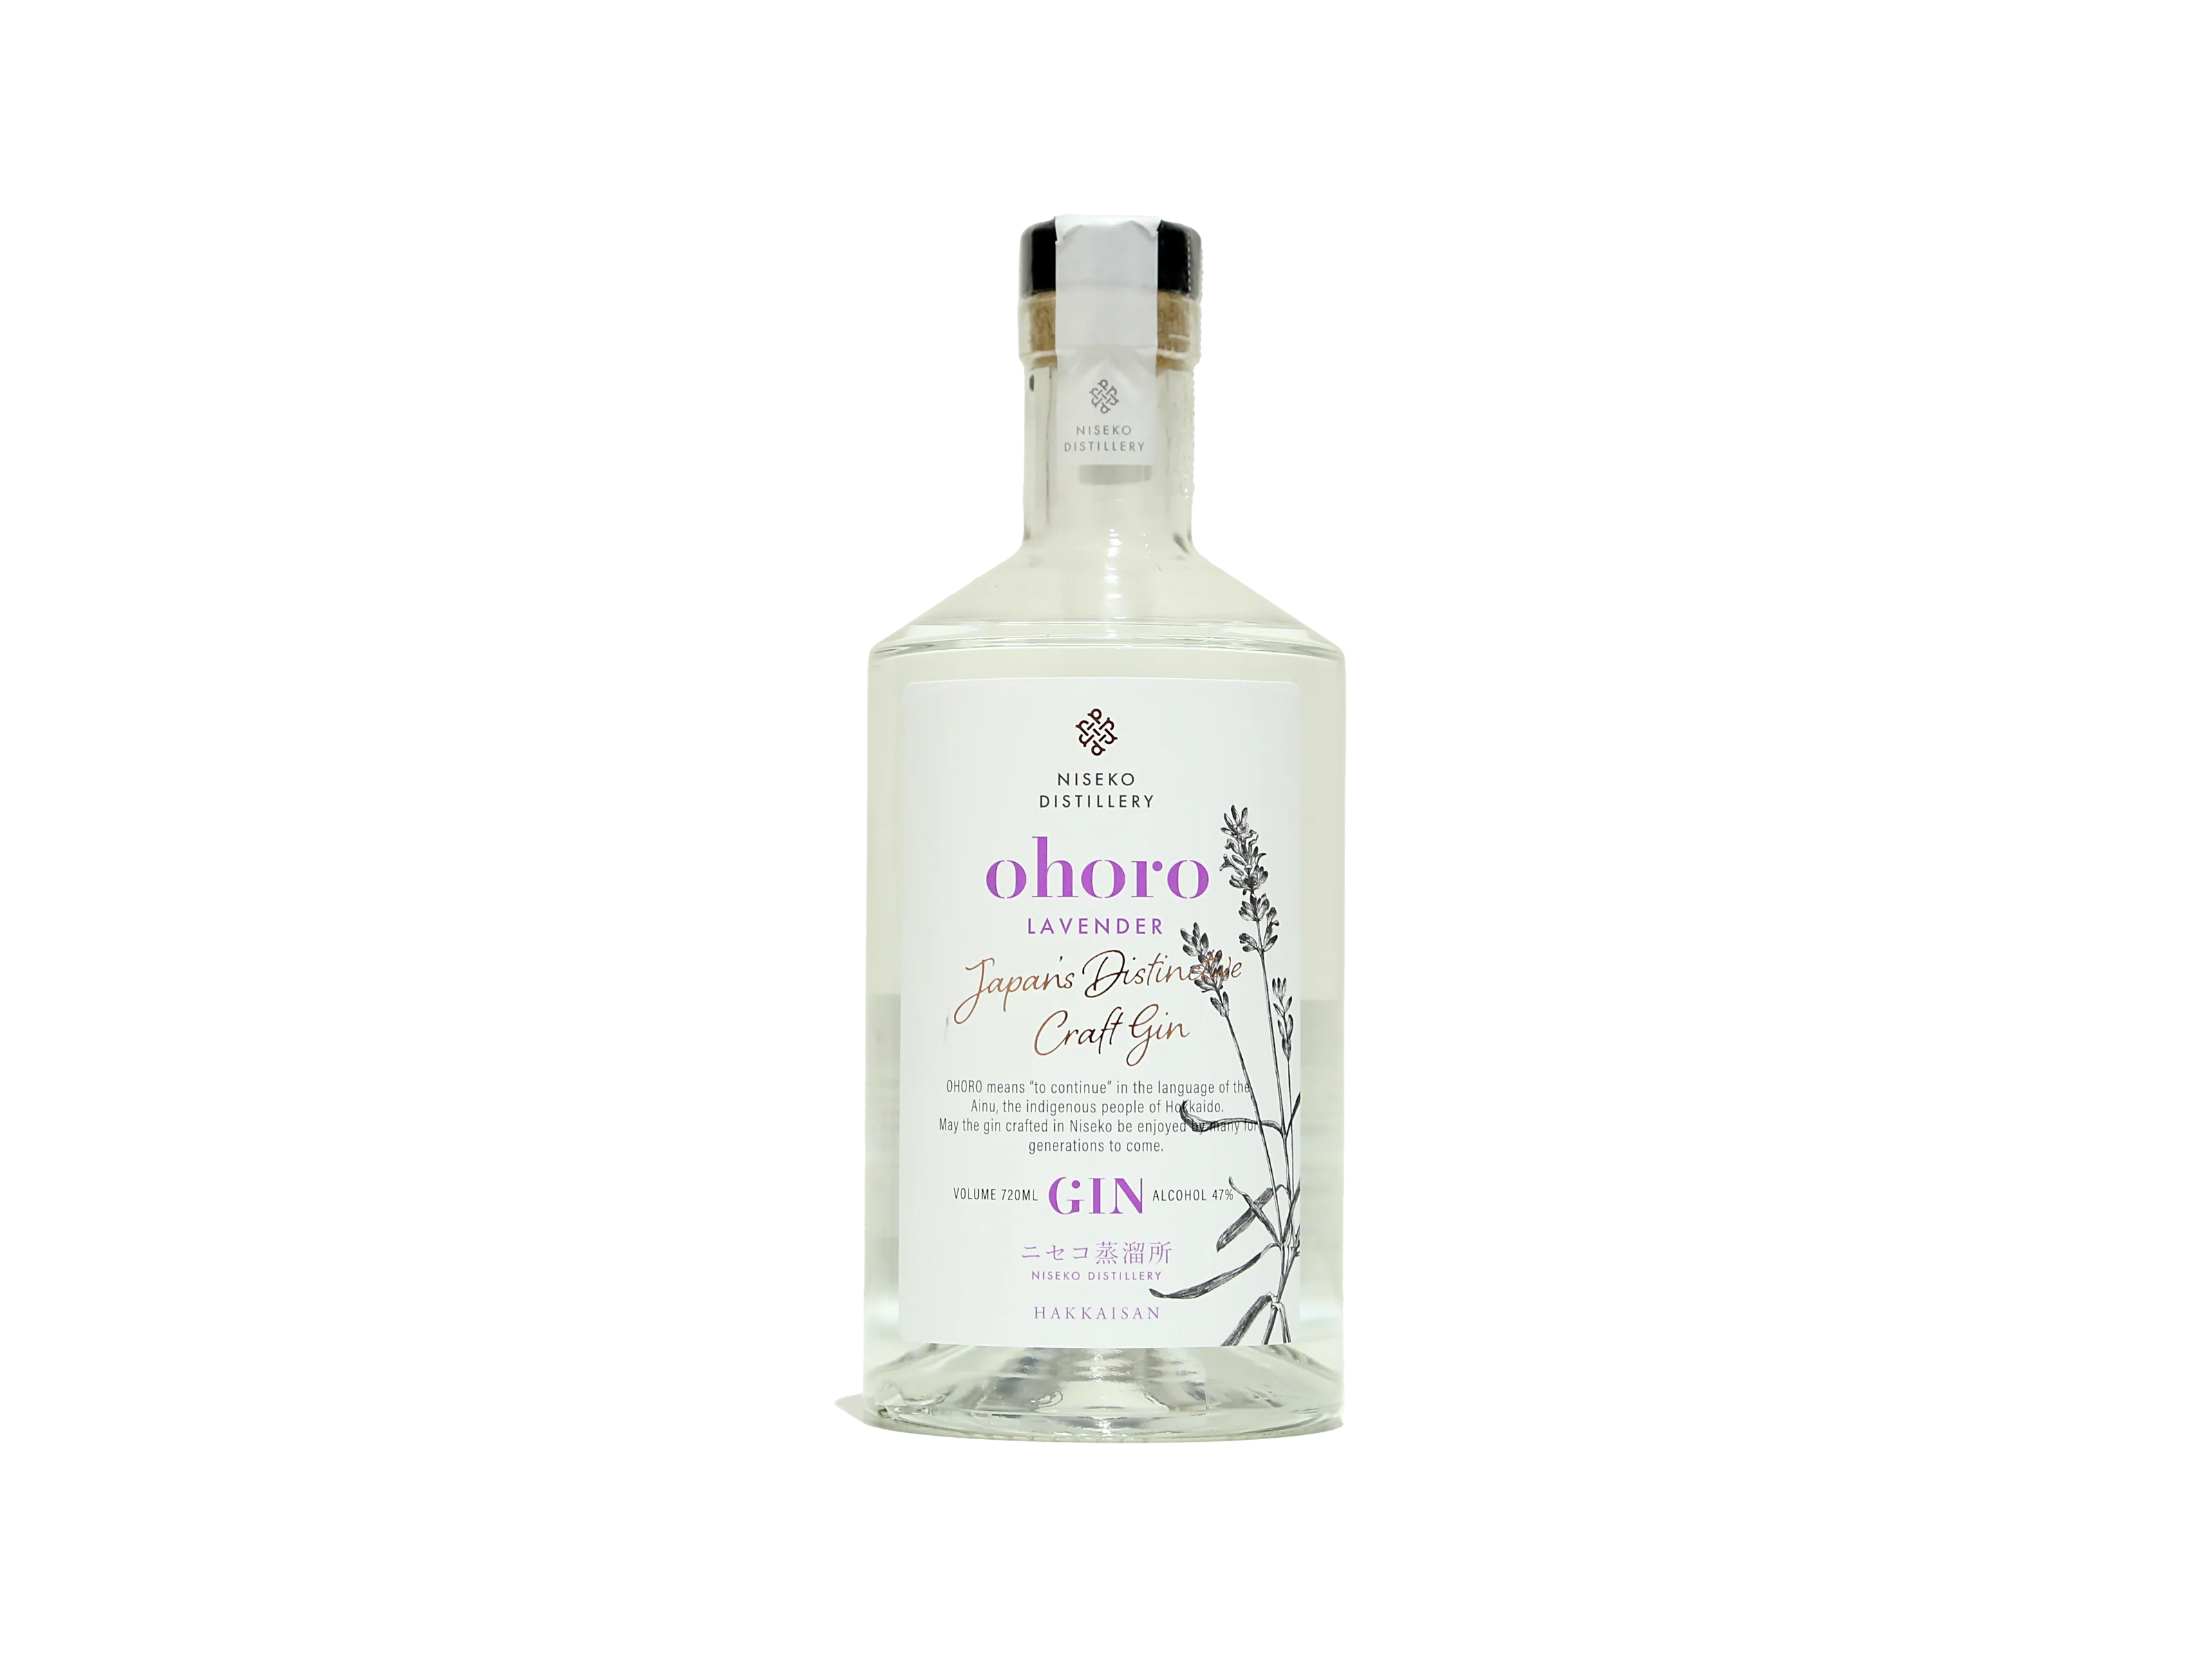 ohoro GIN Limited Edition ラベンダー オホロ - その他